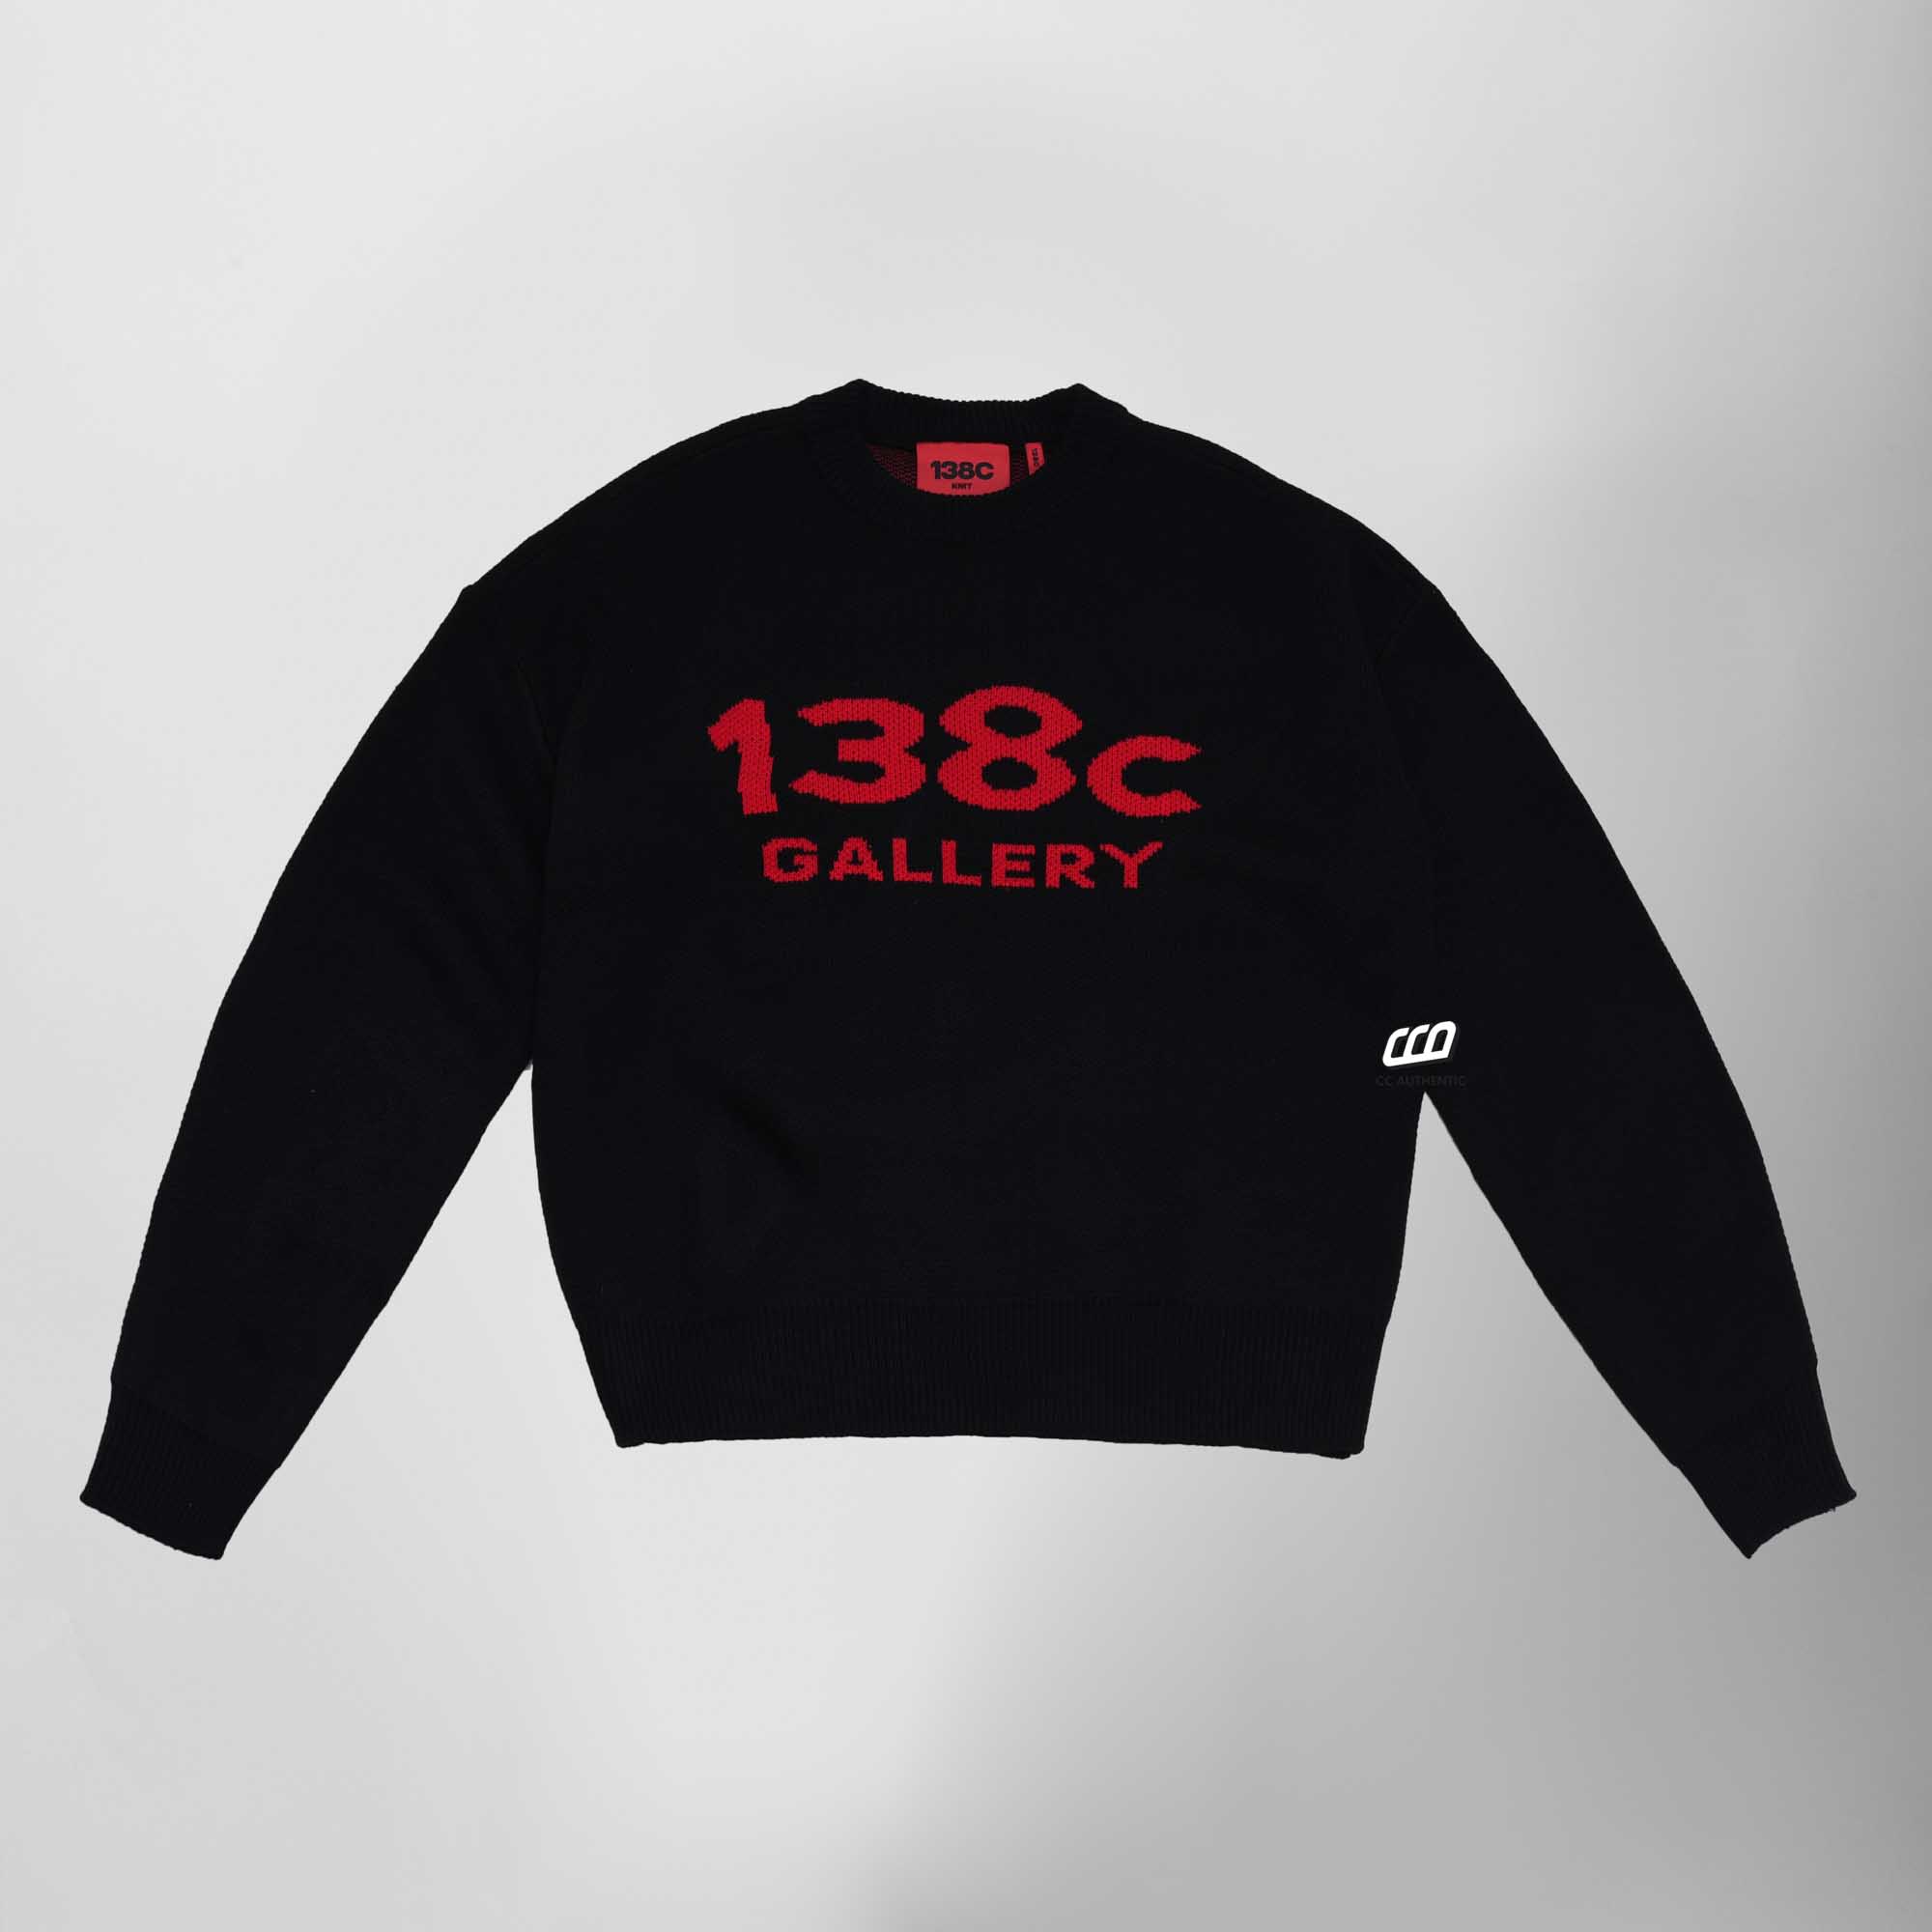 138C GALLERY KNIT SWEATER - BLACK/RED